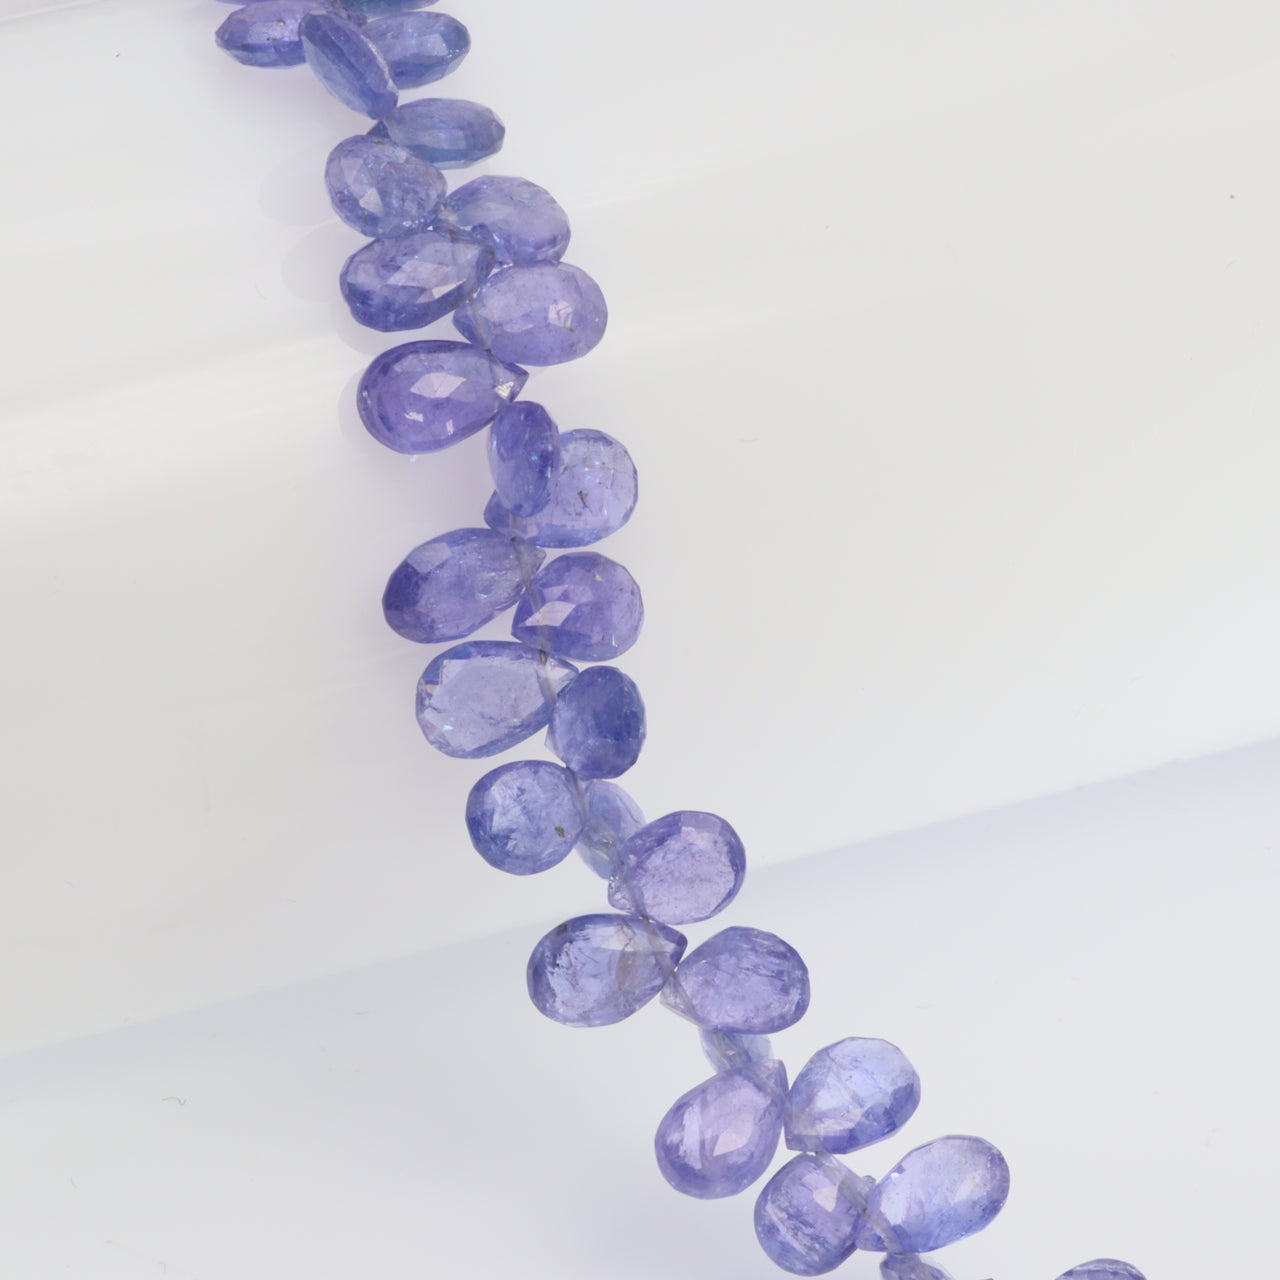 Blue Tanzanite 7x5mm Faceted Pear Shaped Briolettes